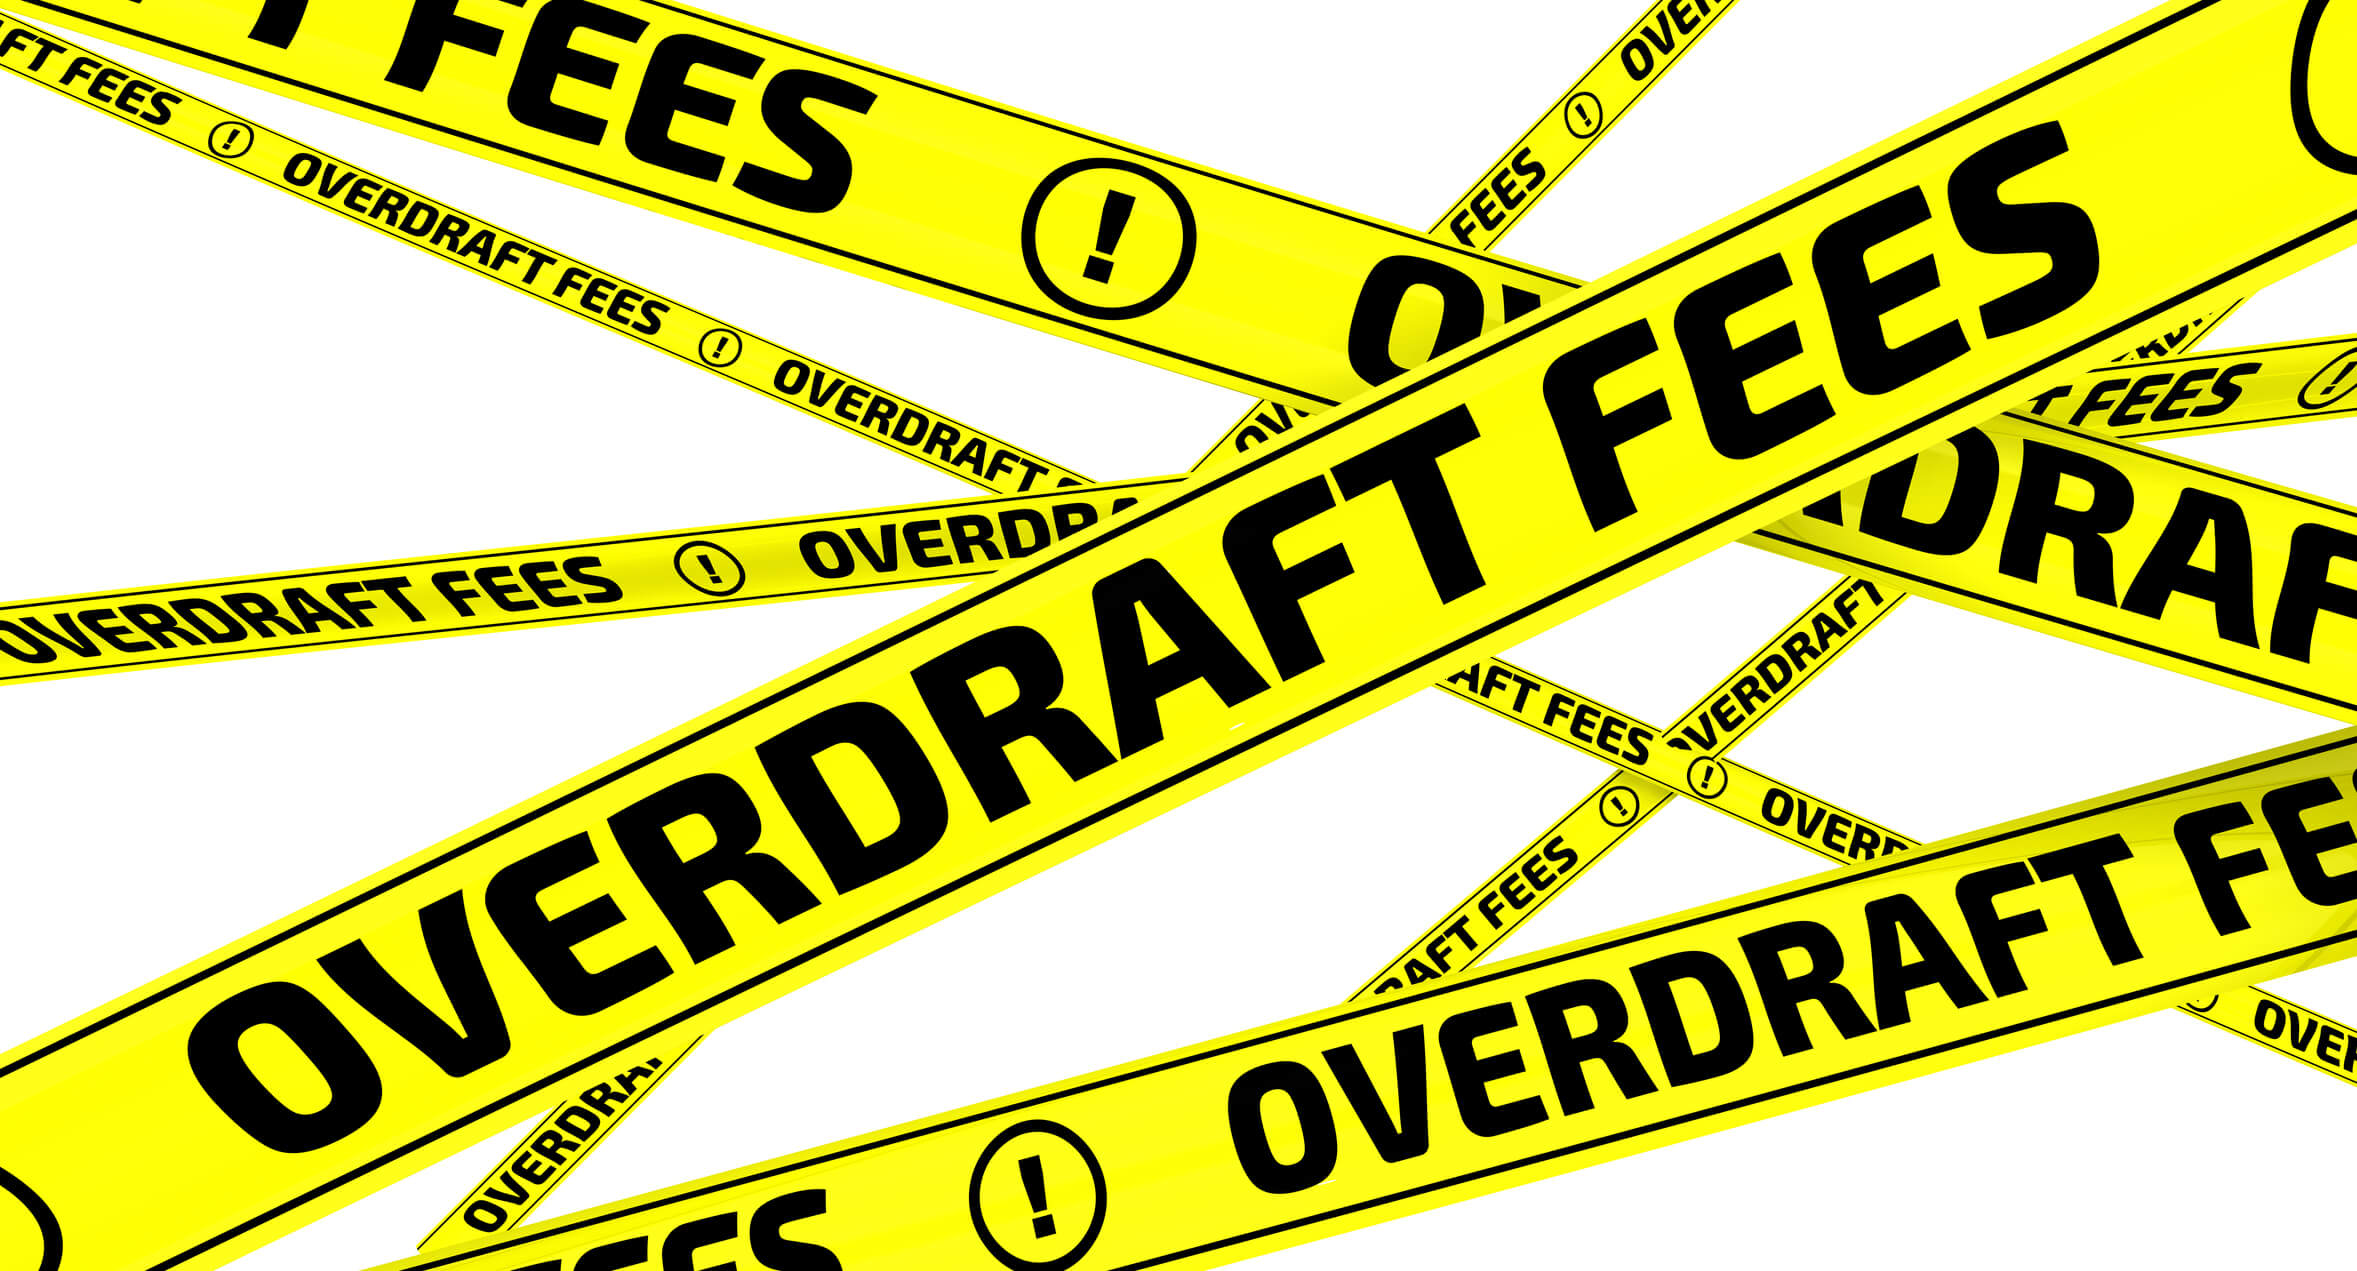 Bank Overdraft Fees - Complete Controller